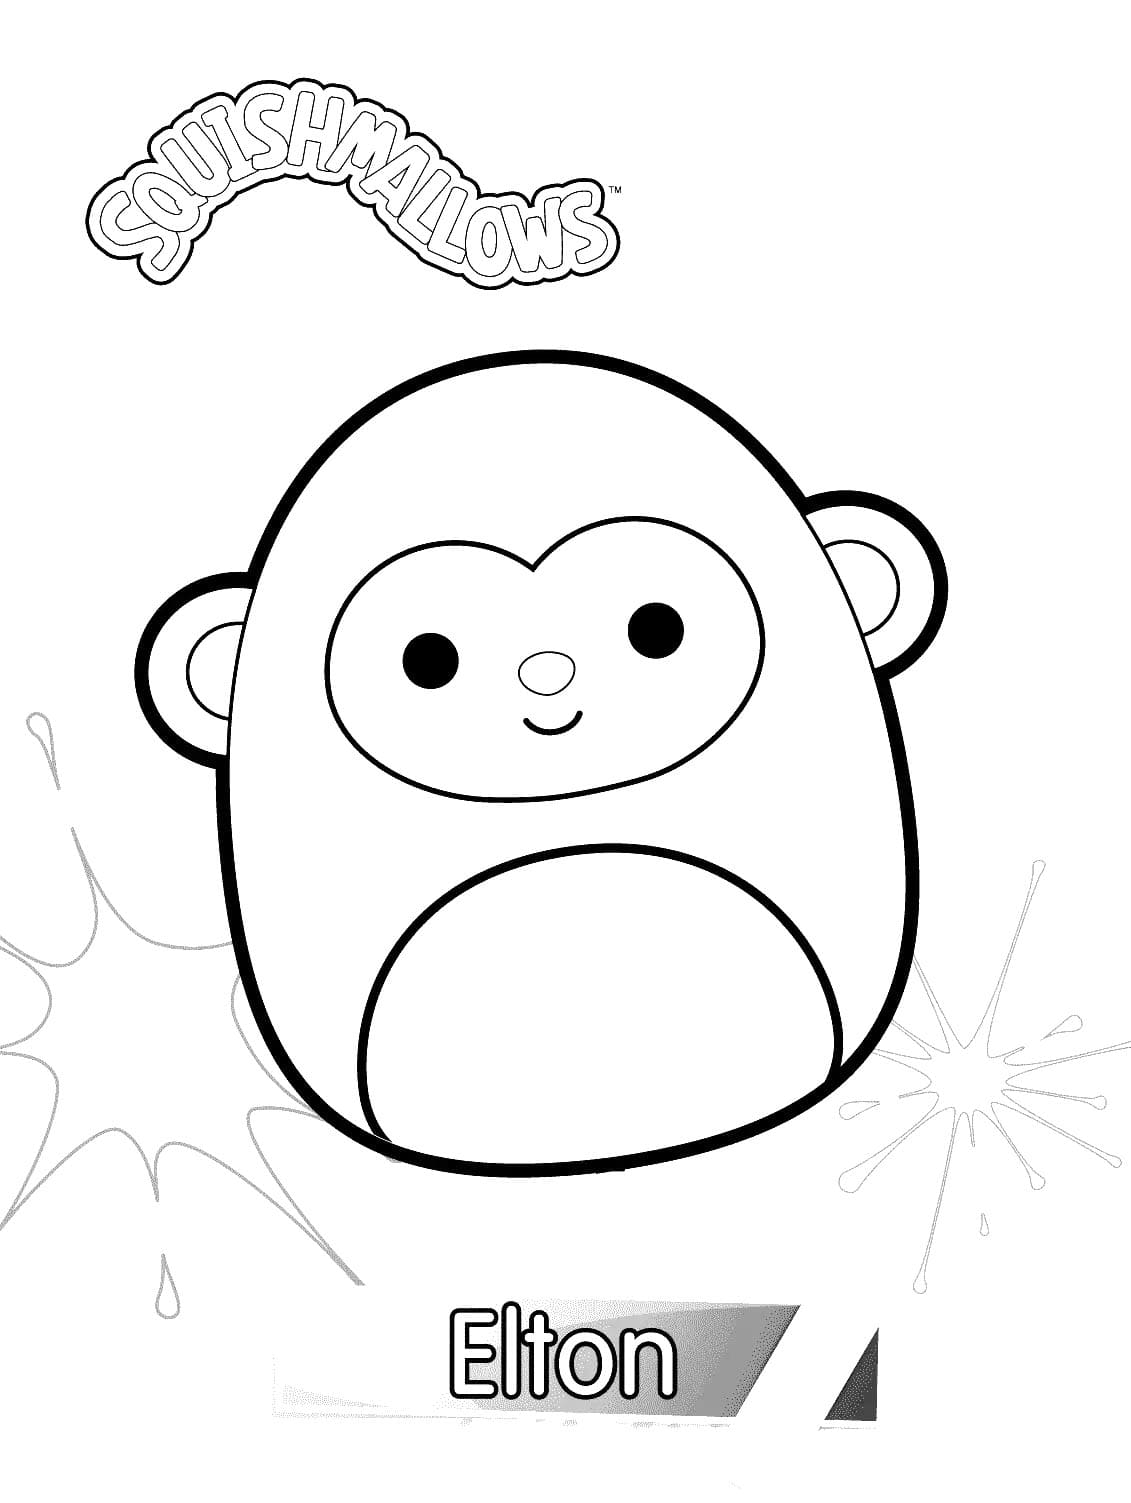 Squishmallows Elton coloring page - Download, Print or Color Online for ...